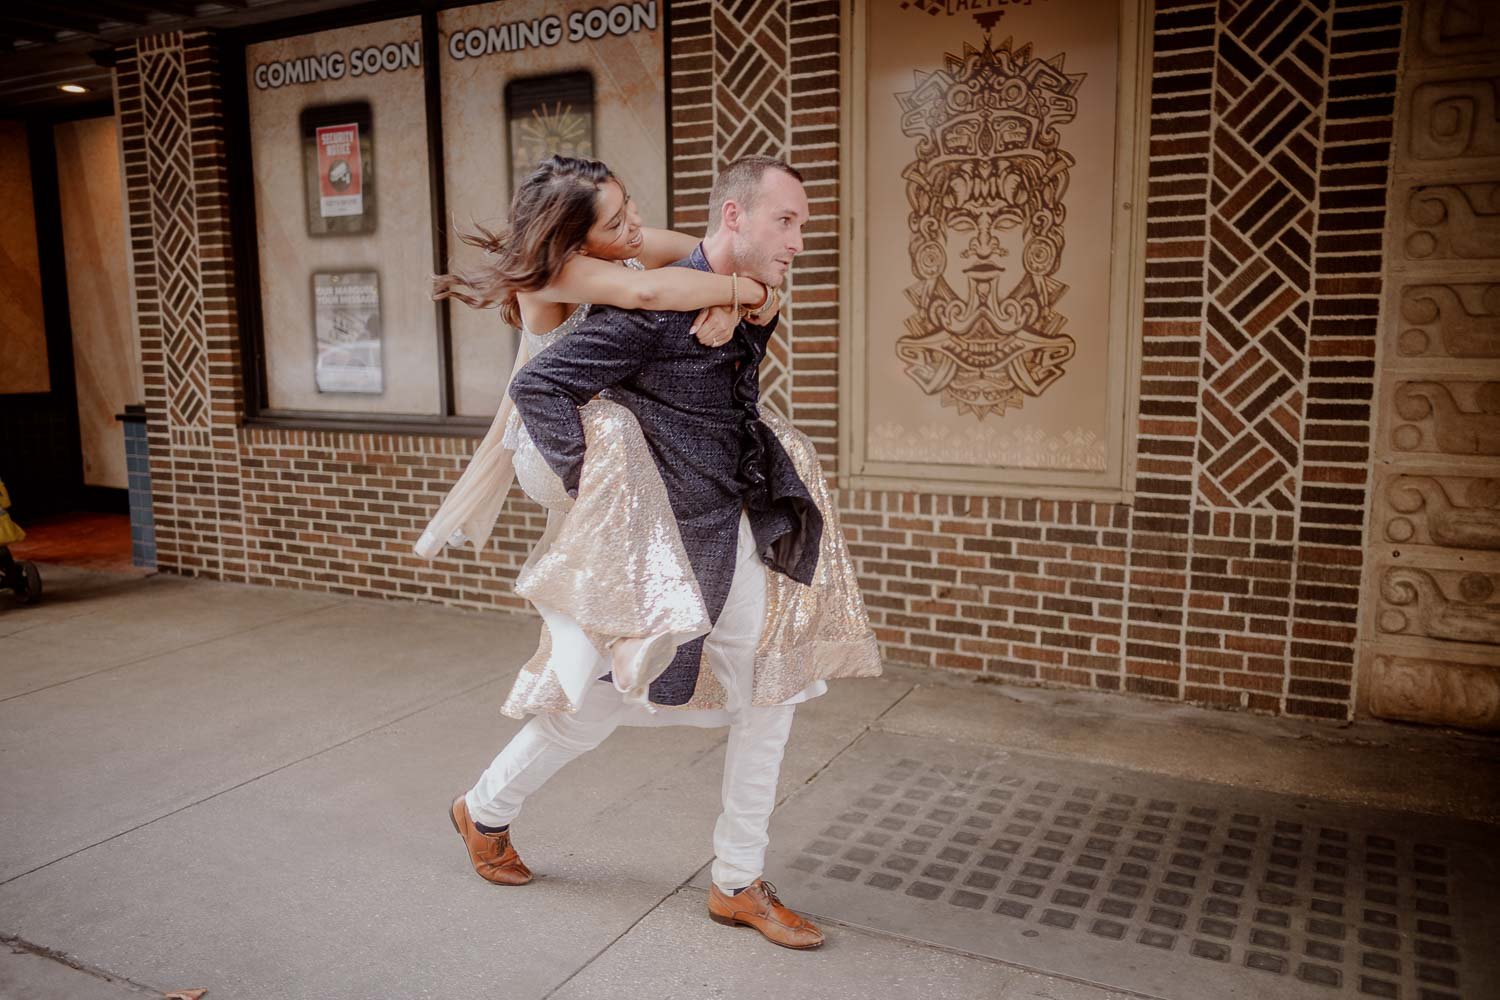 A fun and impromptu  moment as groom gives piggyback ride to bride during engagement session in the Alamo city that is San Antonio, Texas.